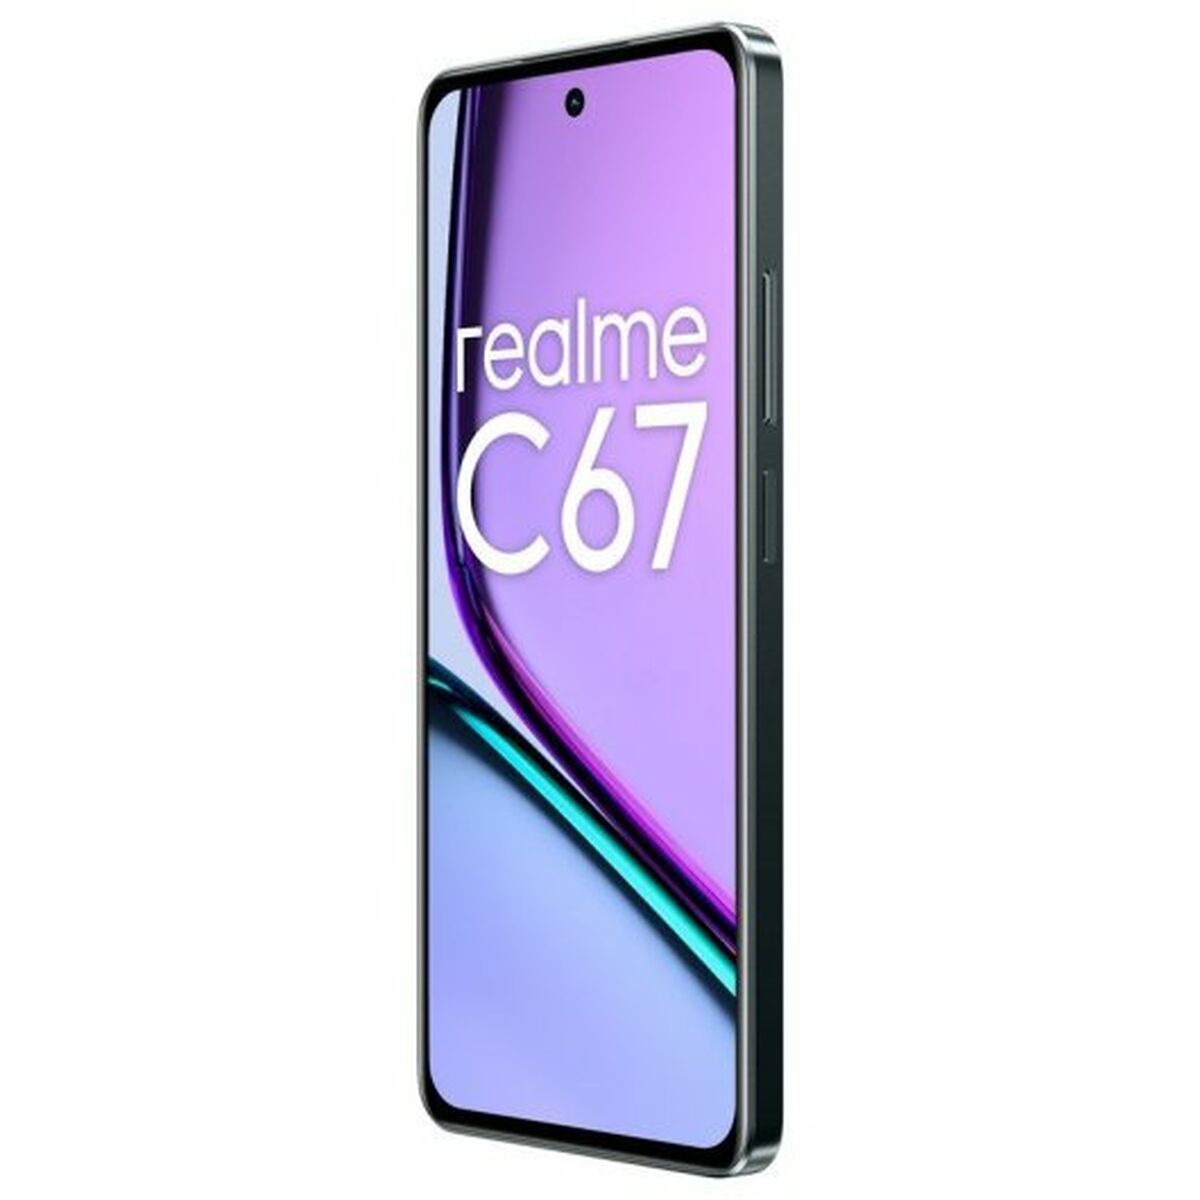 Smartphone Realme 631011001002 Octa Core 8 GB RAM 256 GB Black, Realme, Electronics, Mobile phones, smartphone-realme-631011001002-octa-core-8-gb-ram-256-gb-black, Brand_Realme, category-reference-2609, category-reference-2617, category-reference-2618, category-reference-t-19653, category-reference-t-19894, category-reference-t-21319, Condition_NEW, office, Price_200 - 300, telephones & tablets, Teleworking, wifi y bluetooth, RiotNook